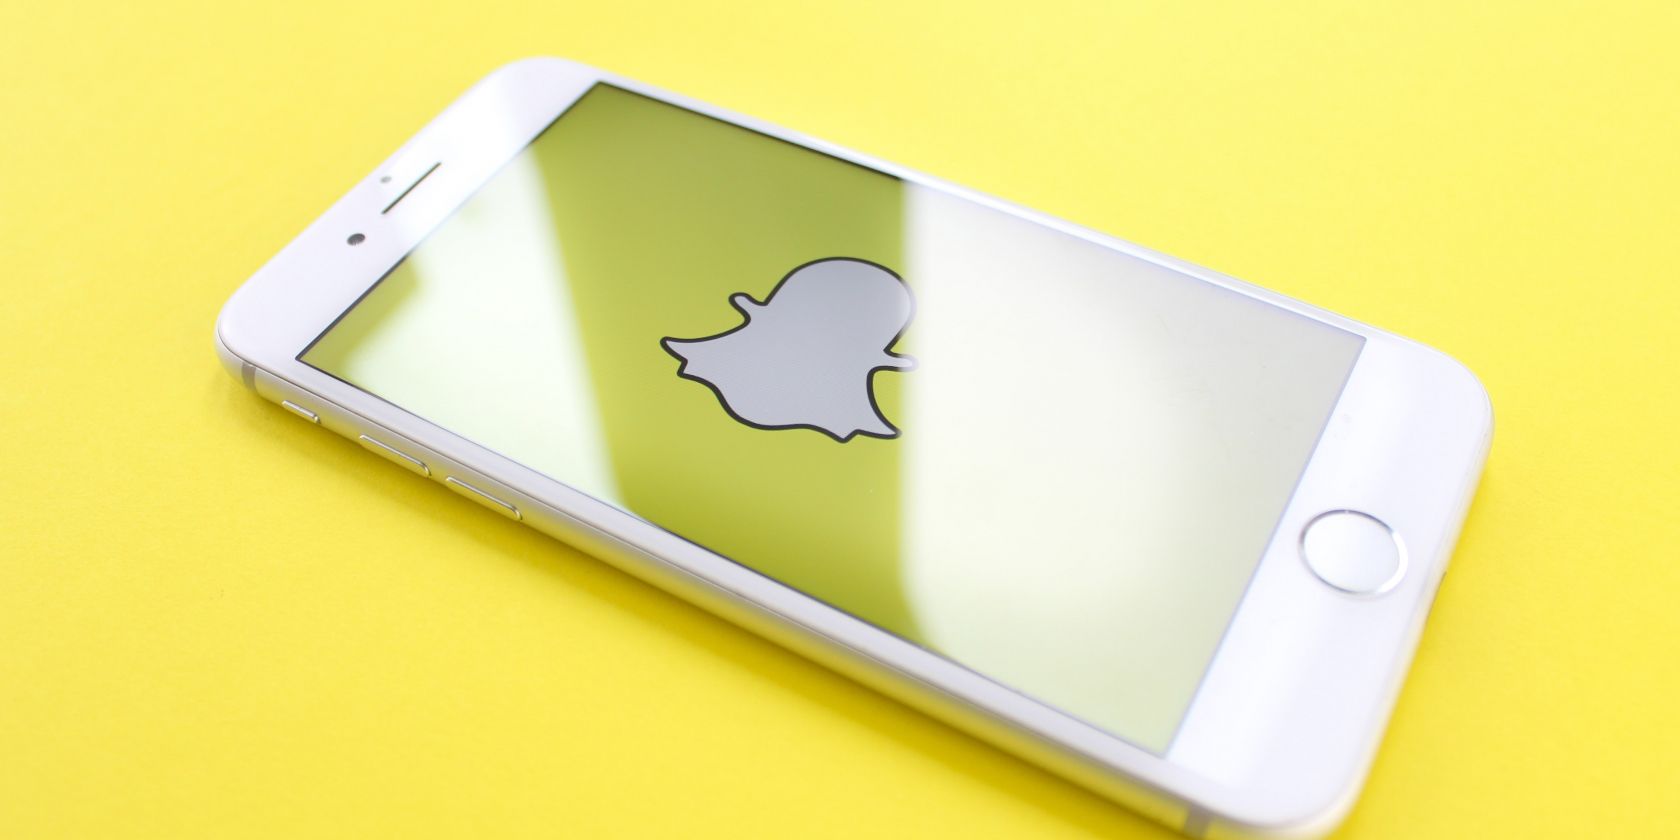 GIFs on Snapchat: How to Send Them 